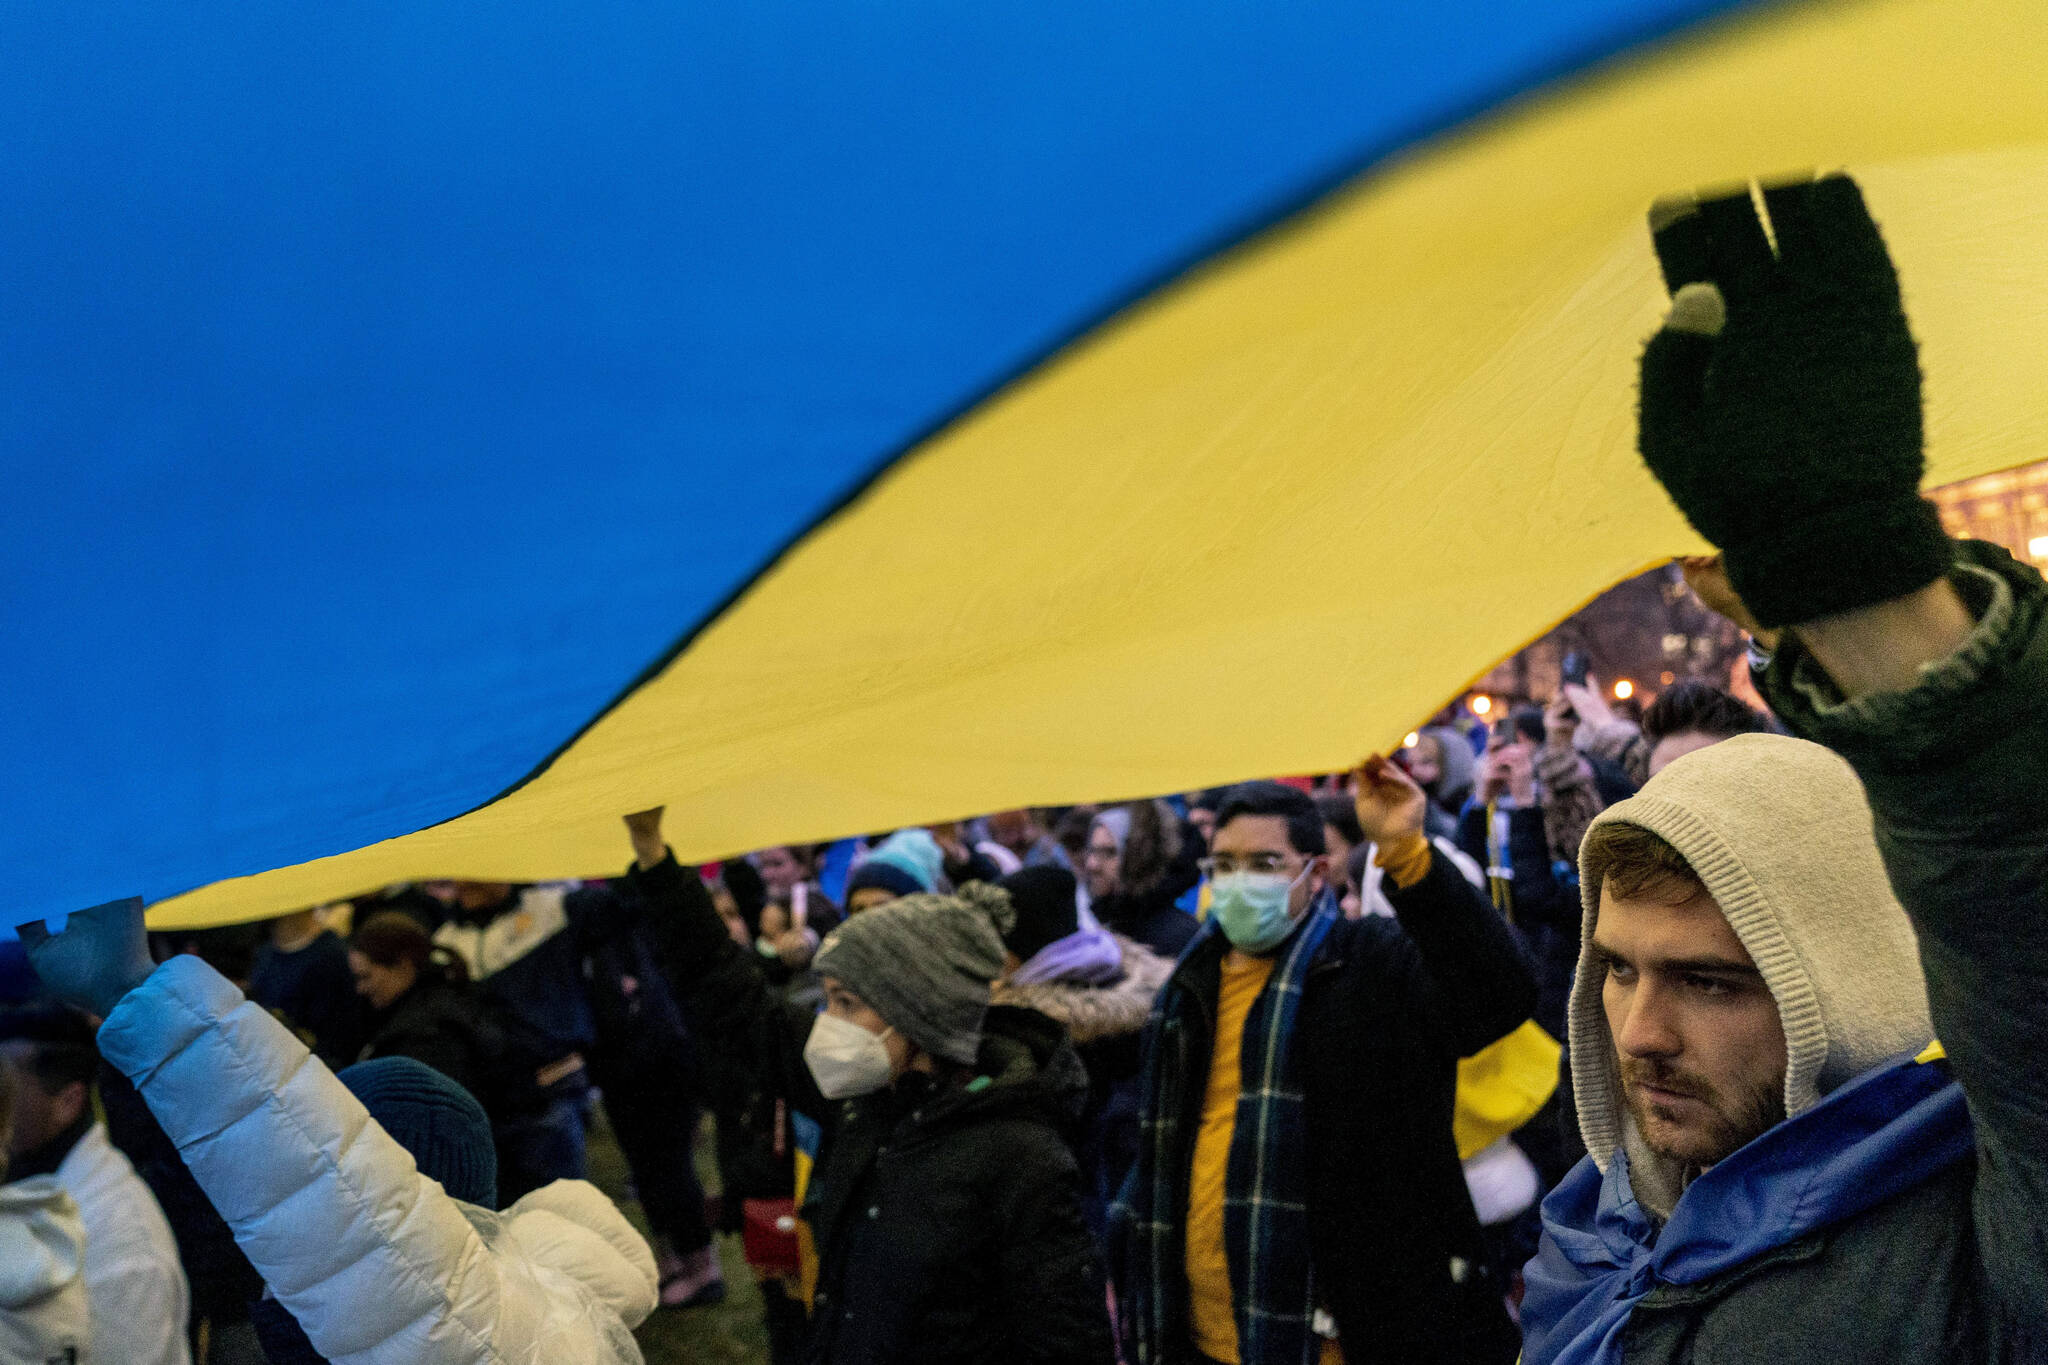 People stand under a giant Ukrainian flag during a vigil to protest the Russian invasion of Ukraine in front of the White House in Washington, Thursday, Feb. 24, 2022. (AP Photo/Andrew Harnik)